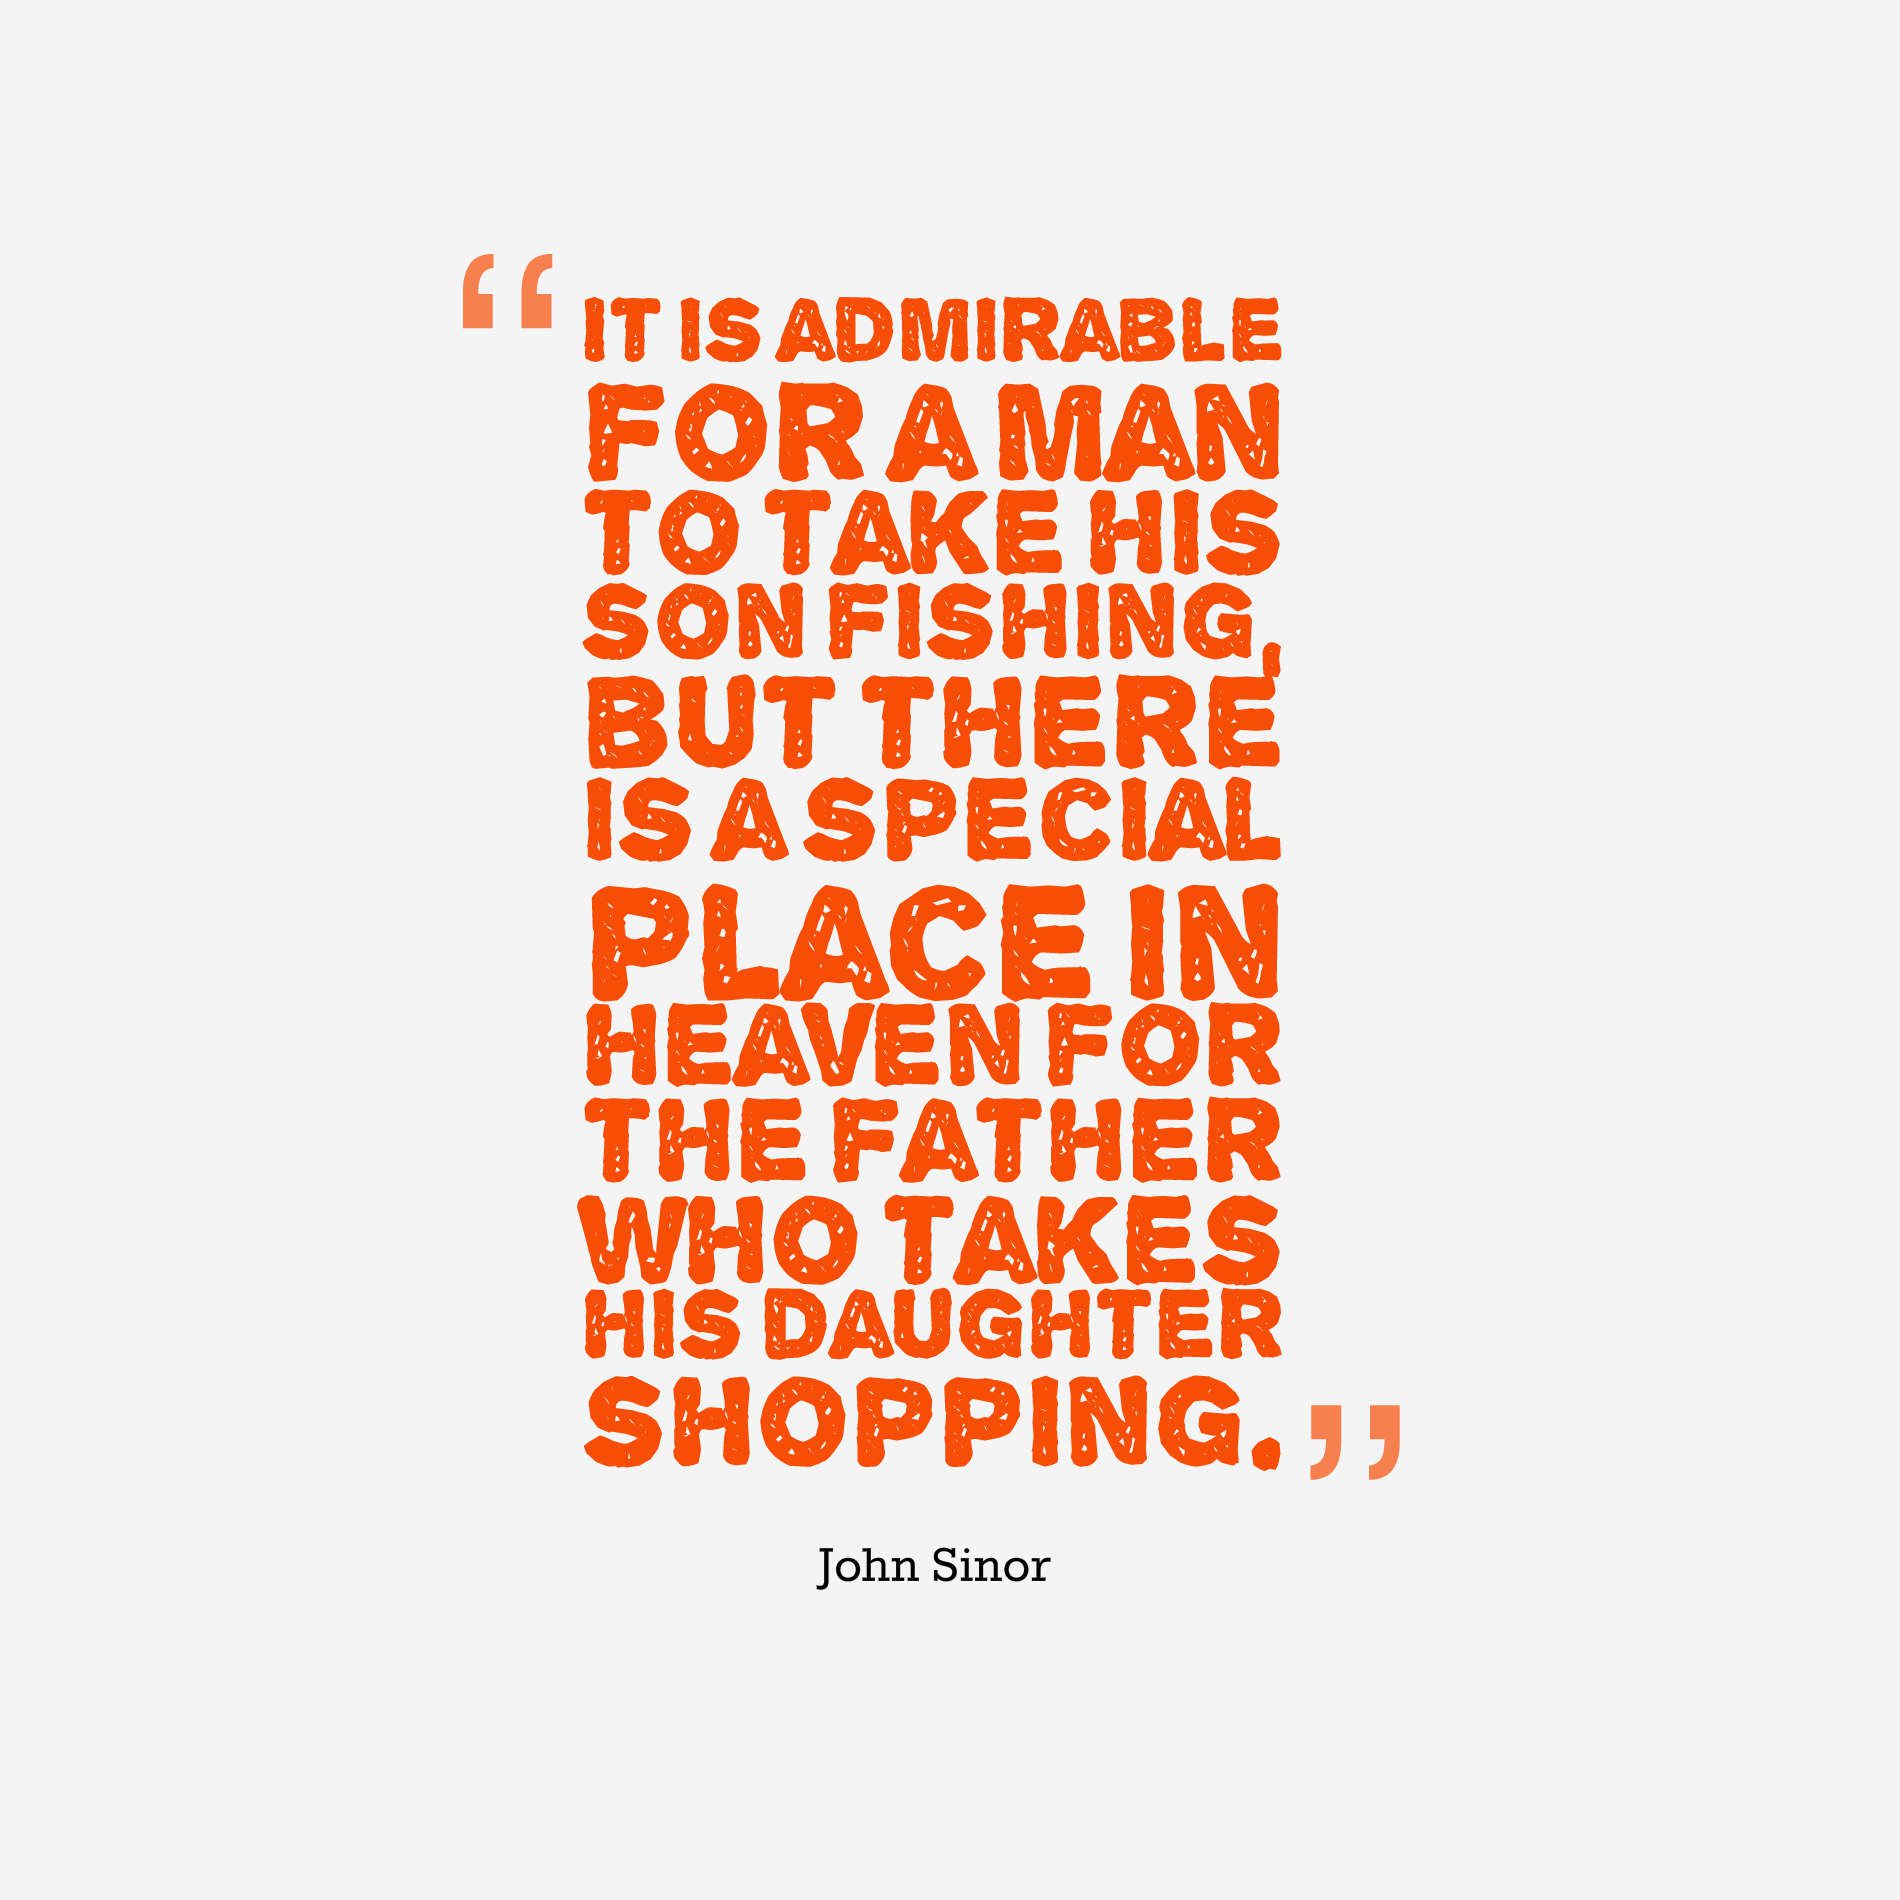 It is admirable for a man to take his son fishing, but there is a special place in heaven for the father who takes his daughter shopping.